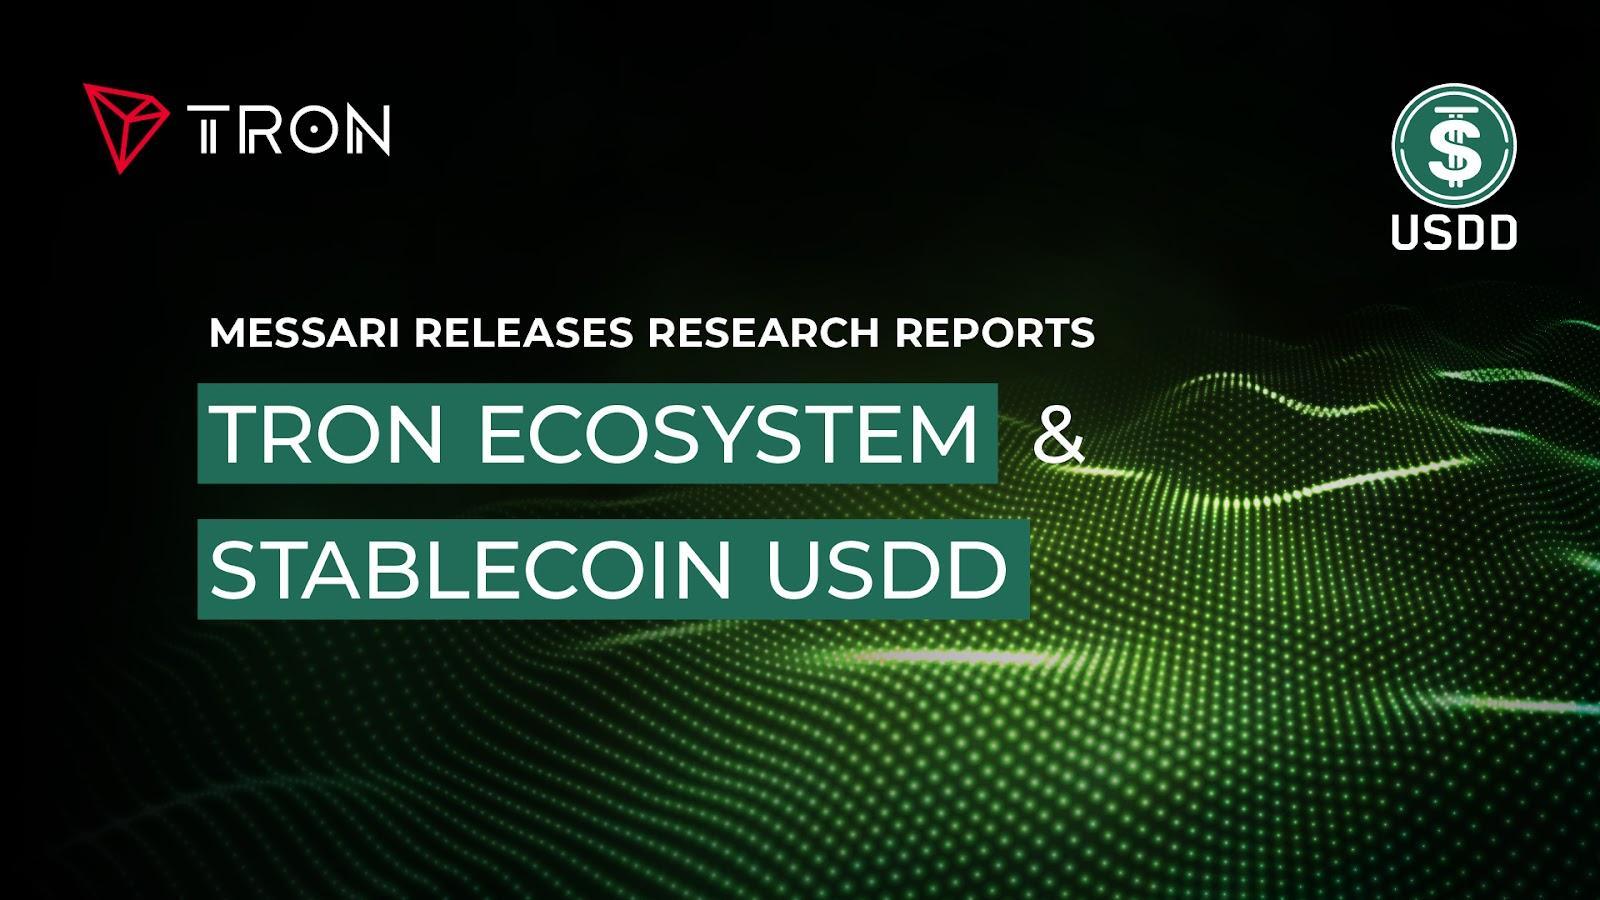 Messari Releases Research Reports on the TRON Ecosystem and the Stablecoin USDD